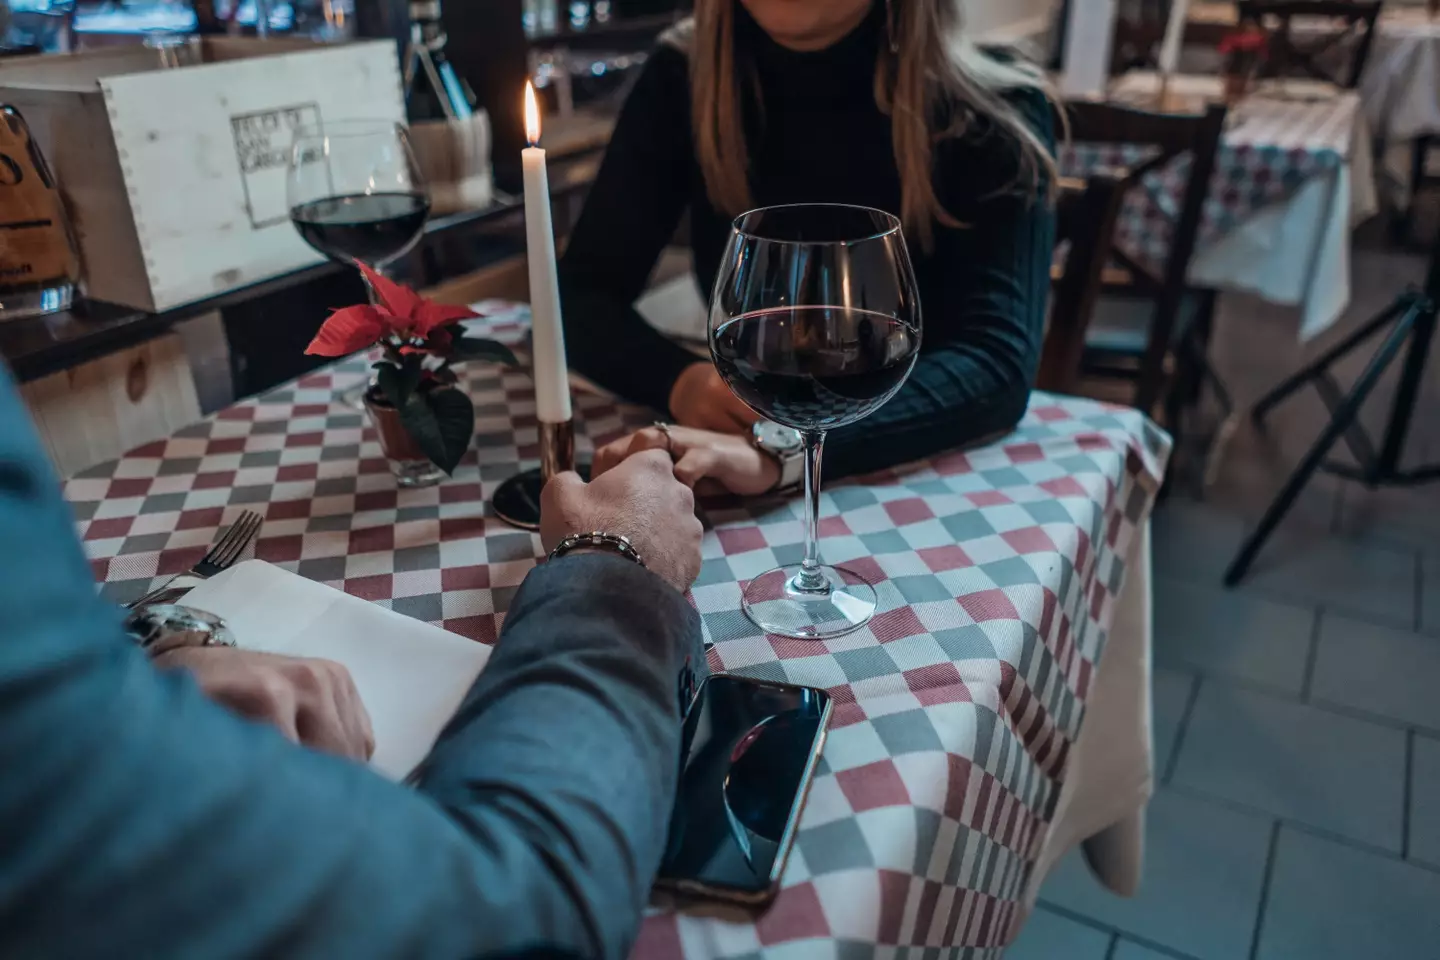 People are debating whether men or women should pay on dates (